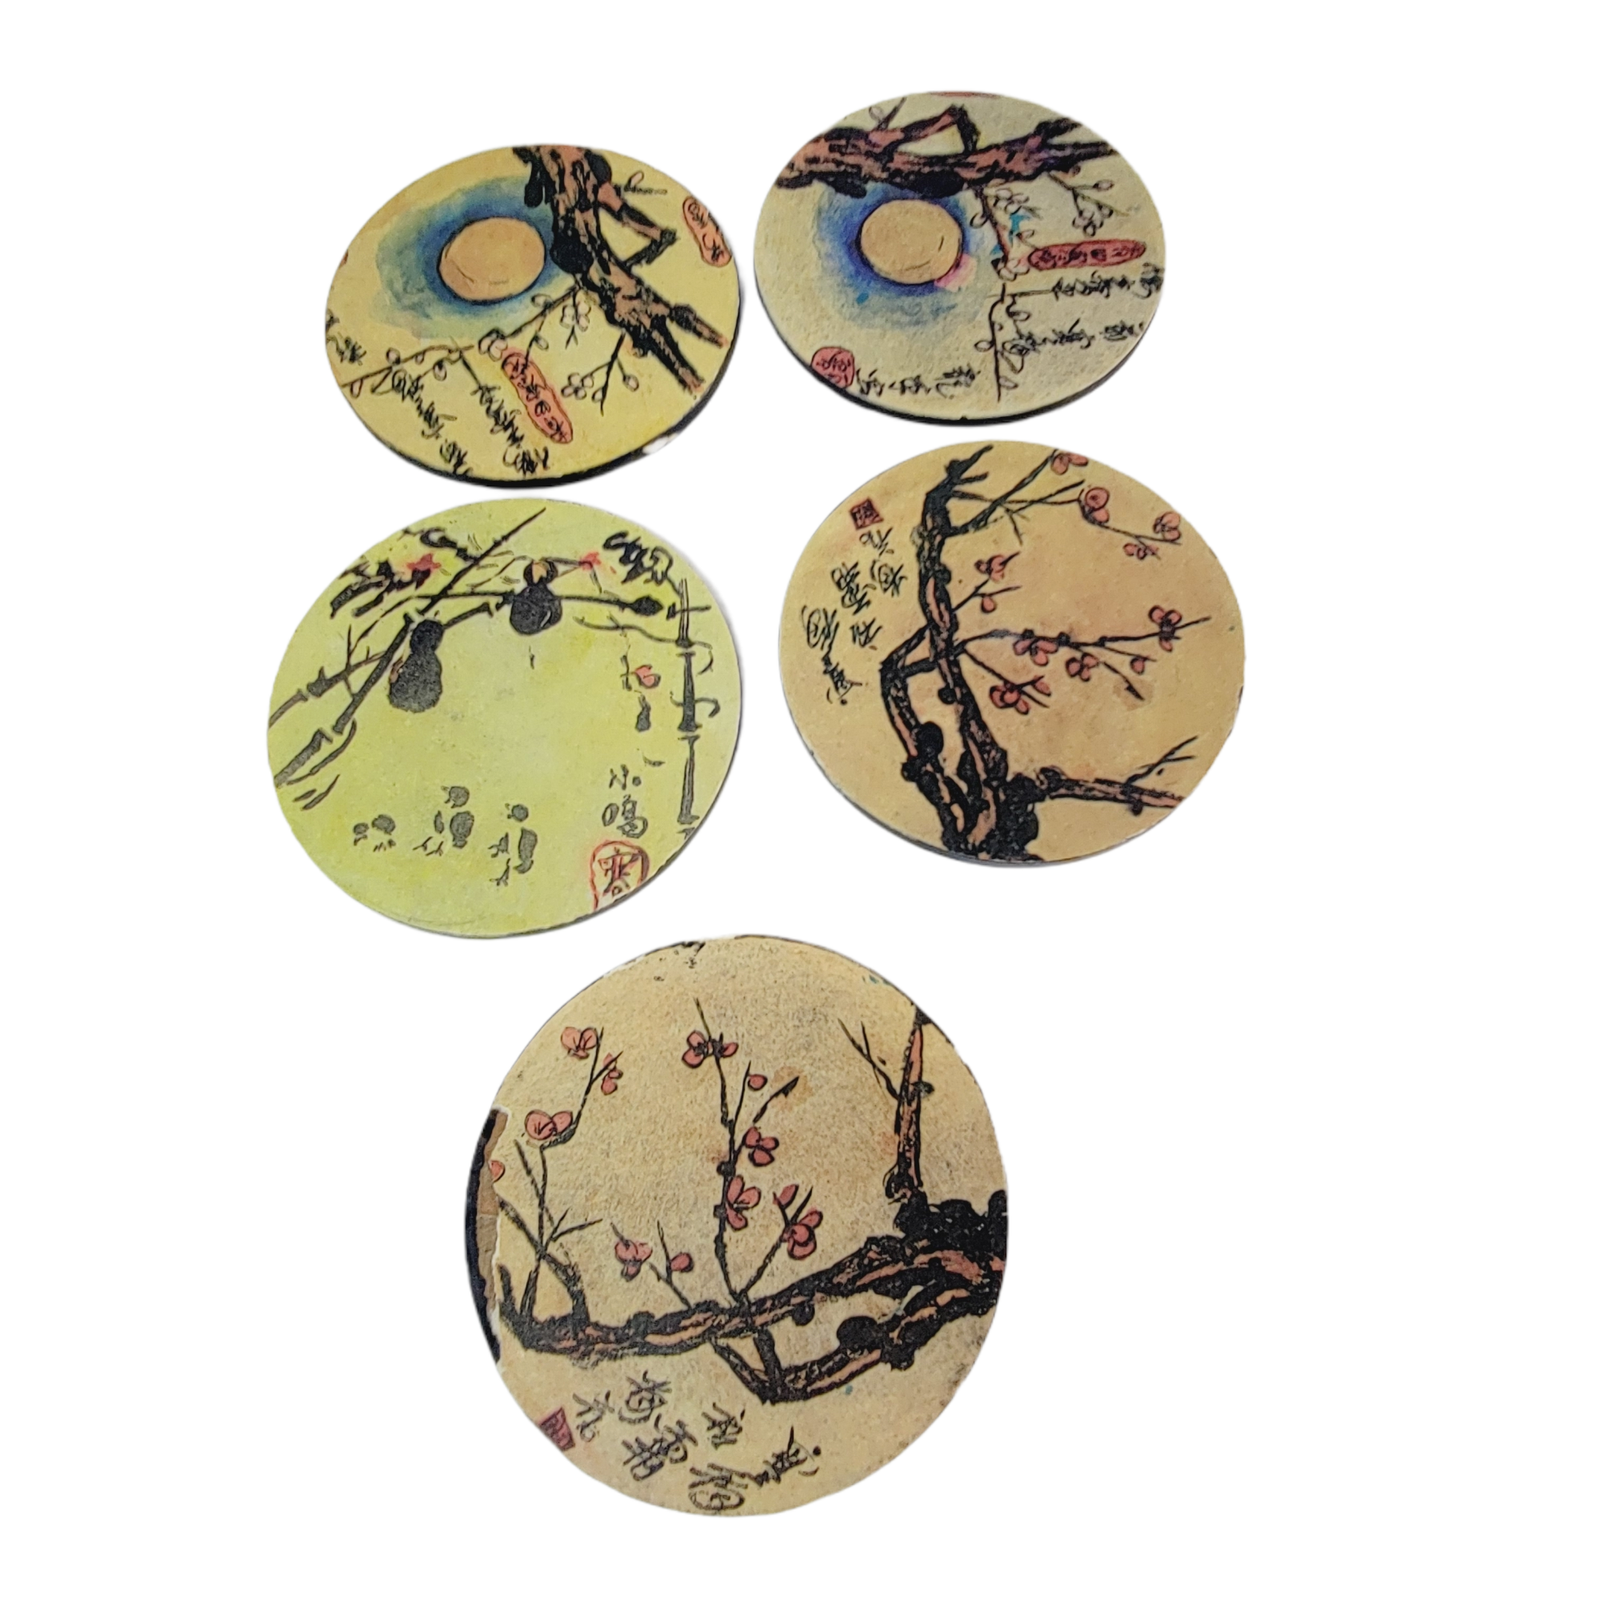 Primary image for Asian Wooden Coasters 5 Piece Set in Box Vintage Hand Painted Floral